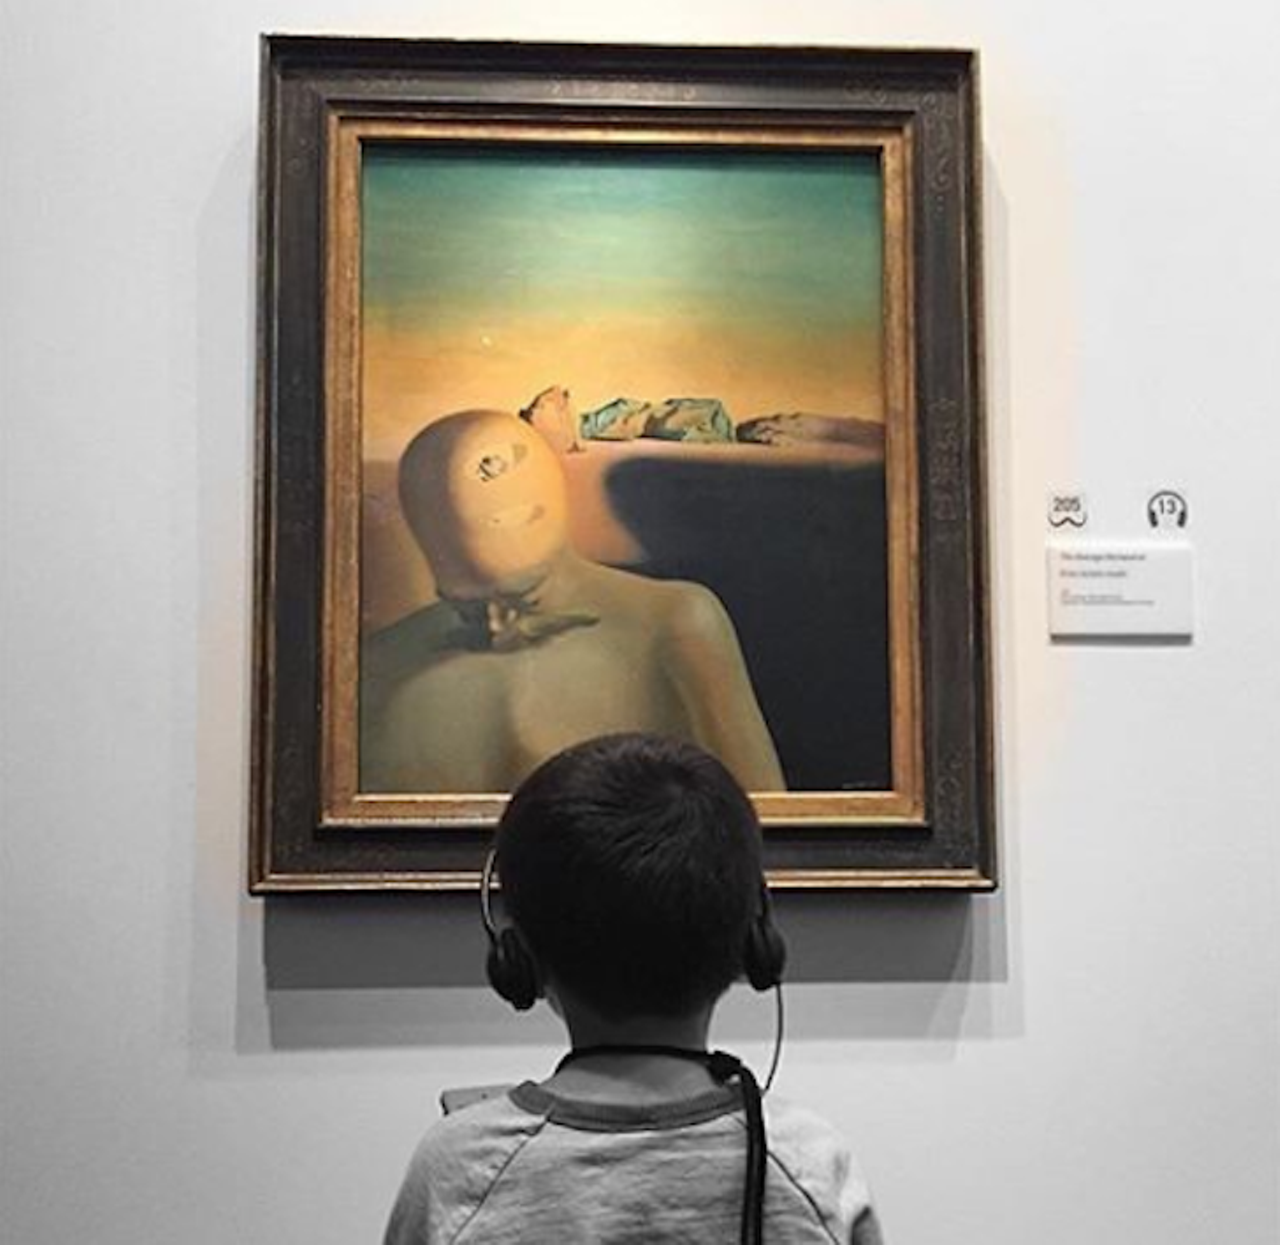 Dali Museum
1 Dali Blvd., St. Petersburg | 727-823-3767
The St. Pete Dali Museum has the largest collection of works by the famed artist in the entire world (like the lobster phone and the melting clocks!). What better way to spend an afternoon than digging through the works of a genius?
Photo via dalimuseum/Instagram